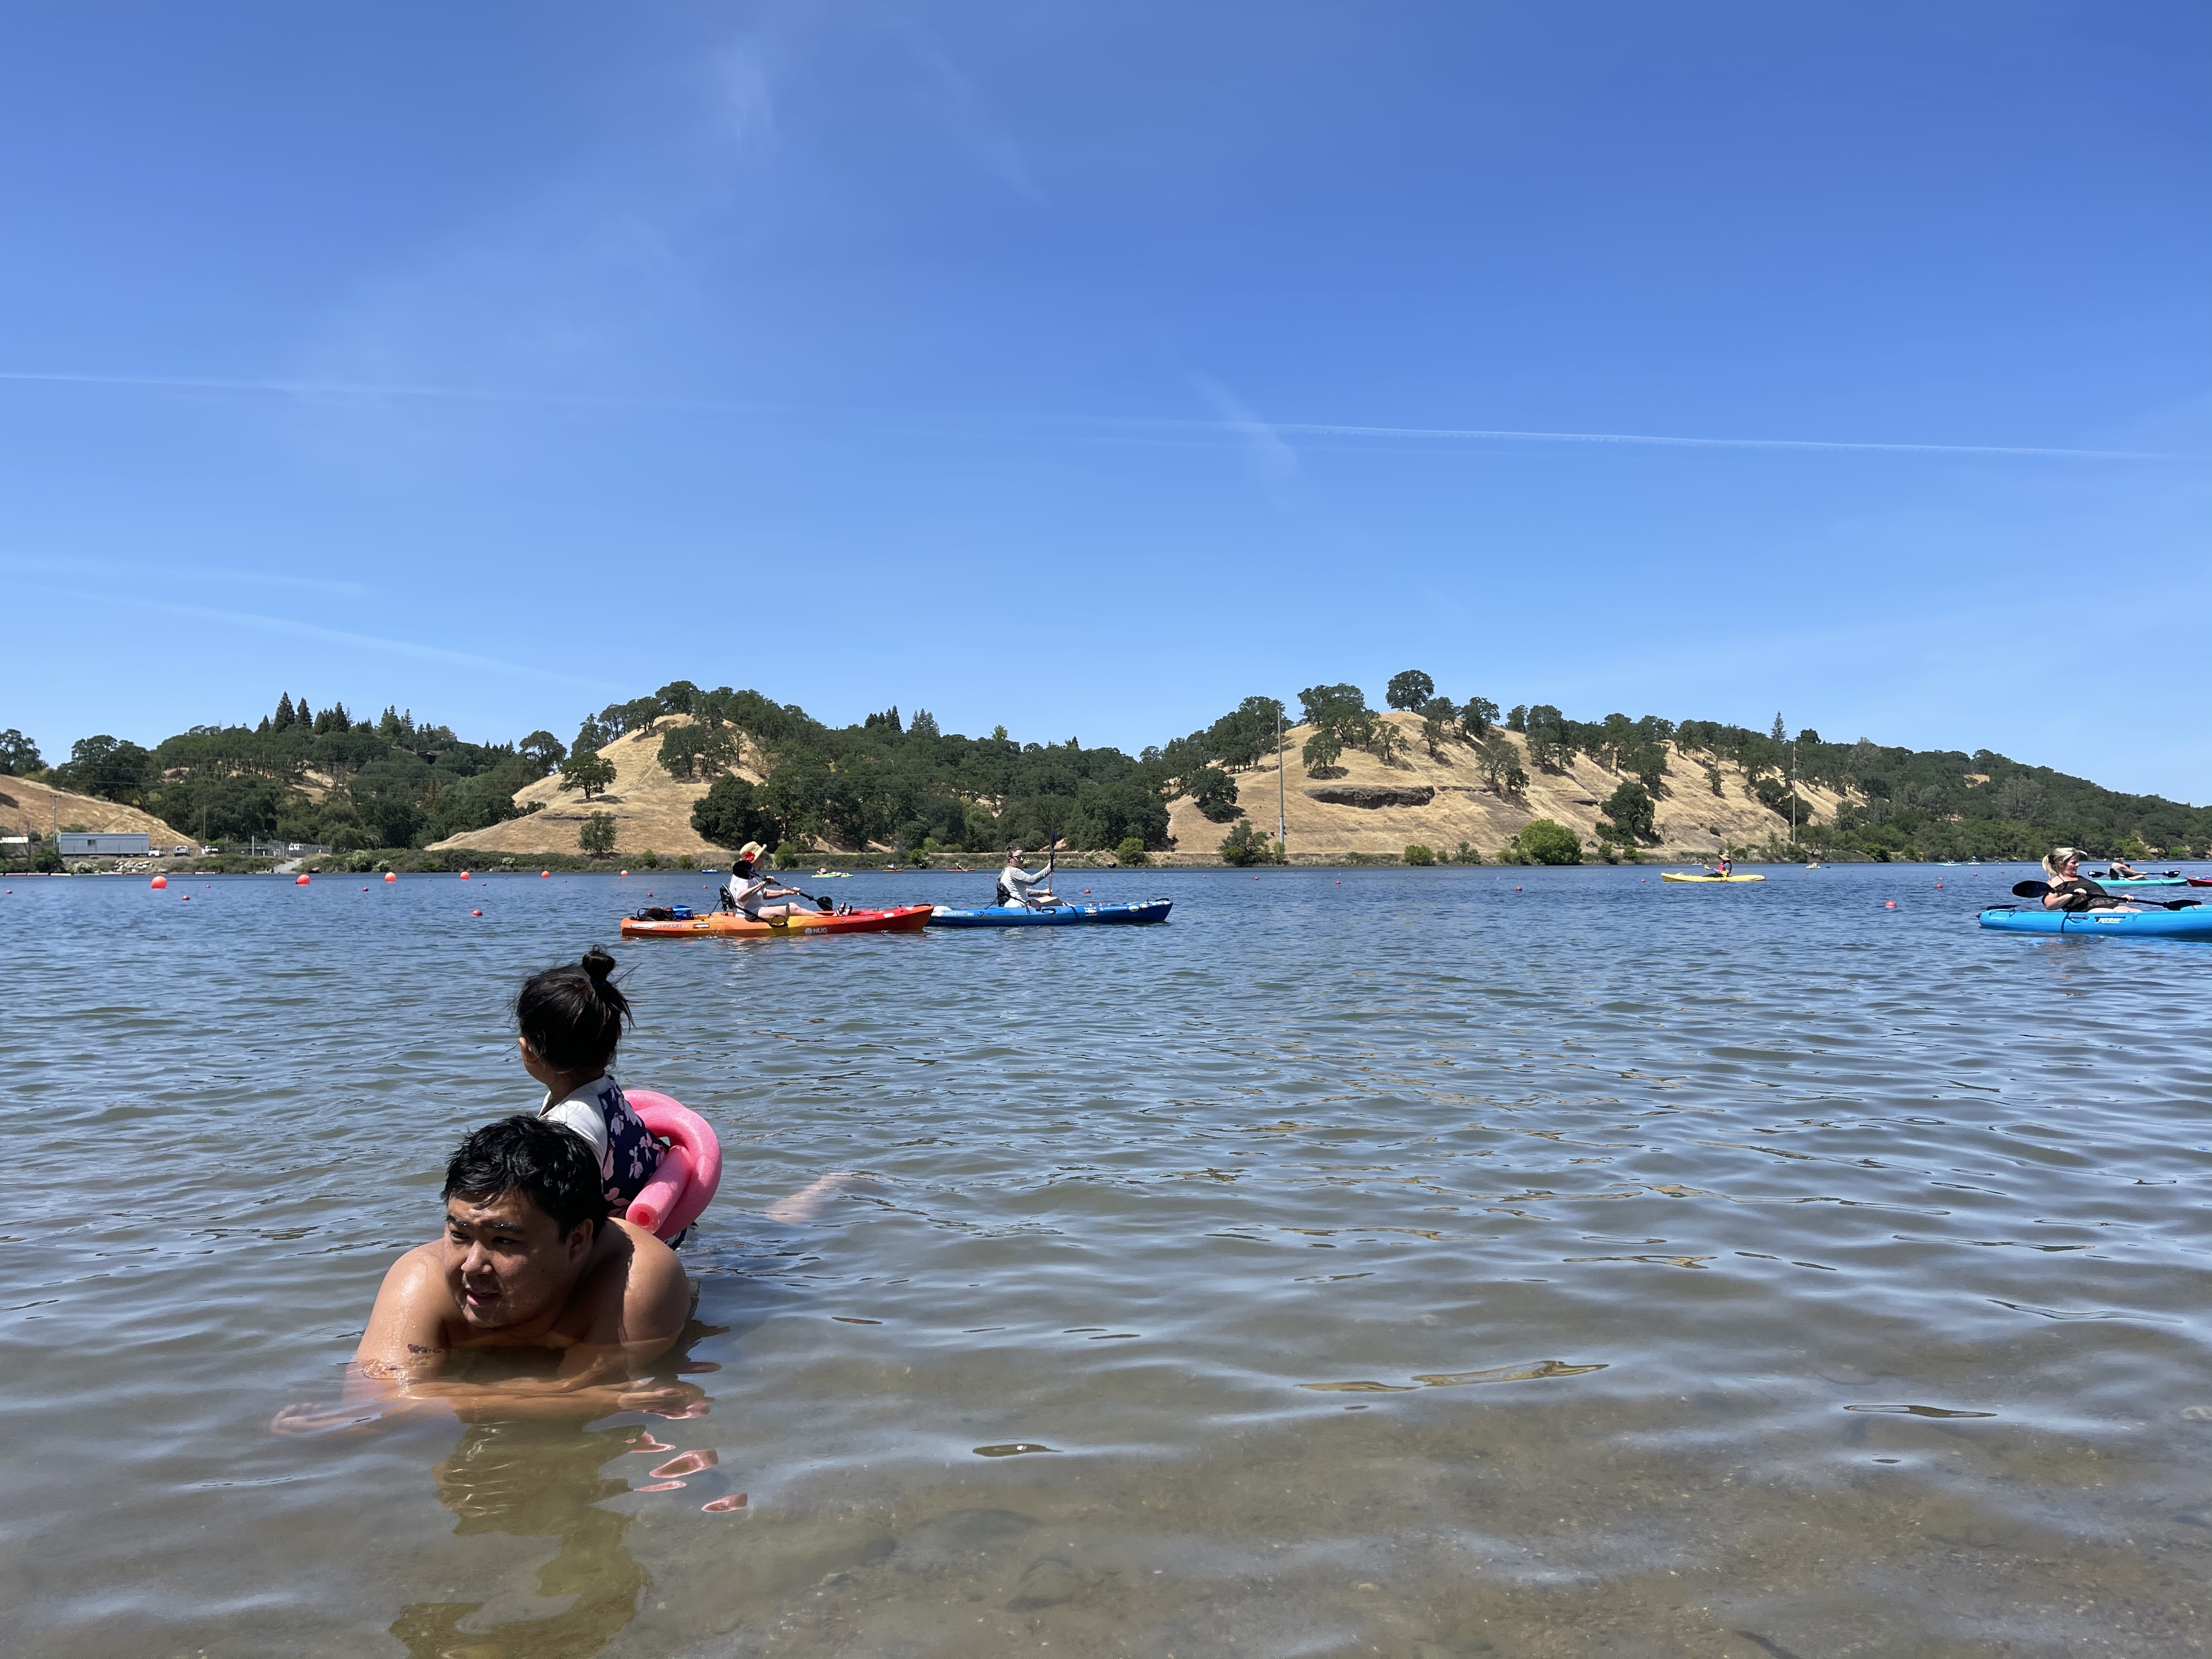 A Dad and his child are playing in the water with kayakers and rolling hills in the background at Nimbus Flats.